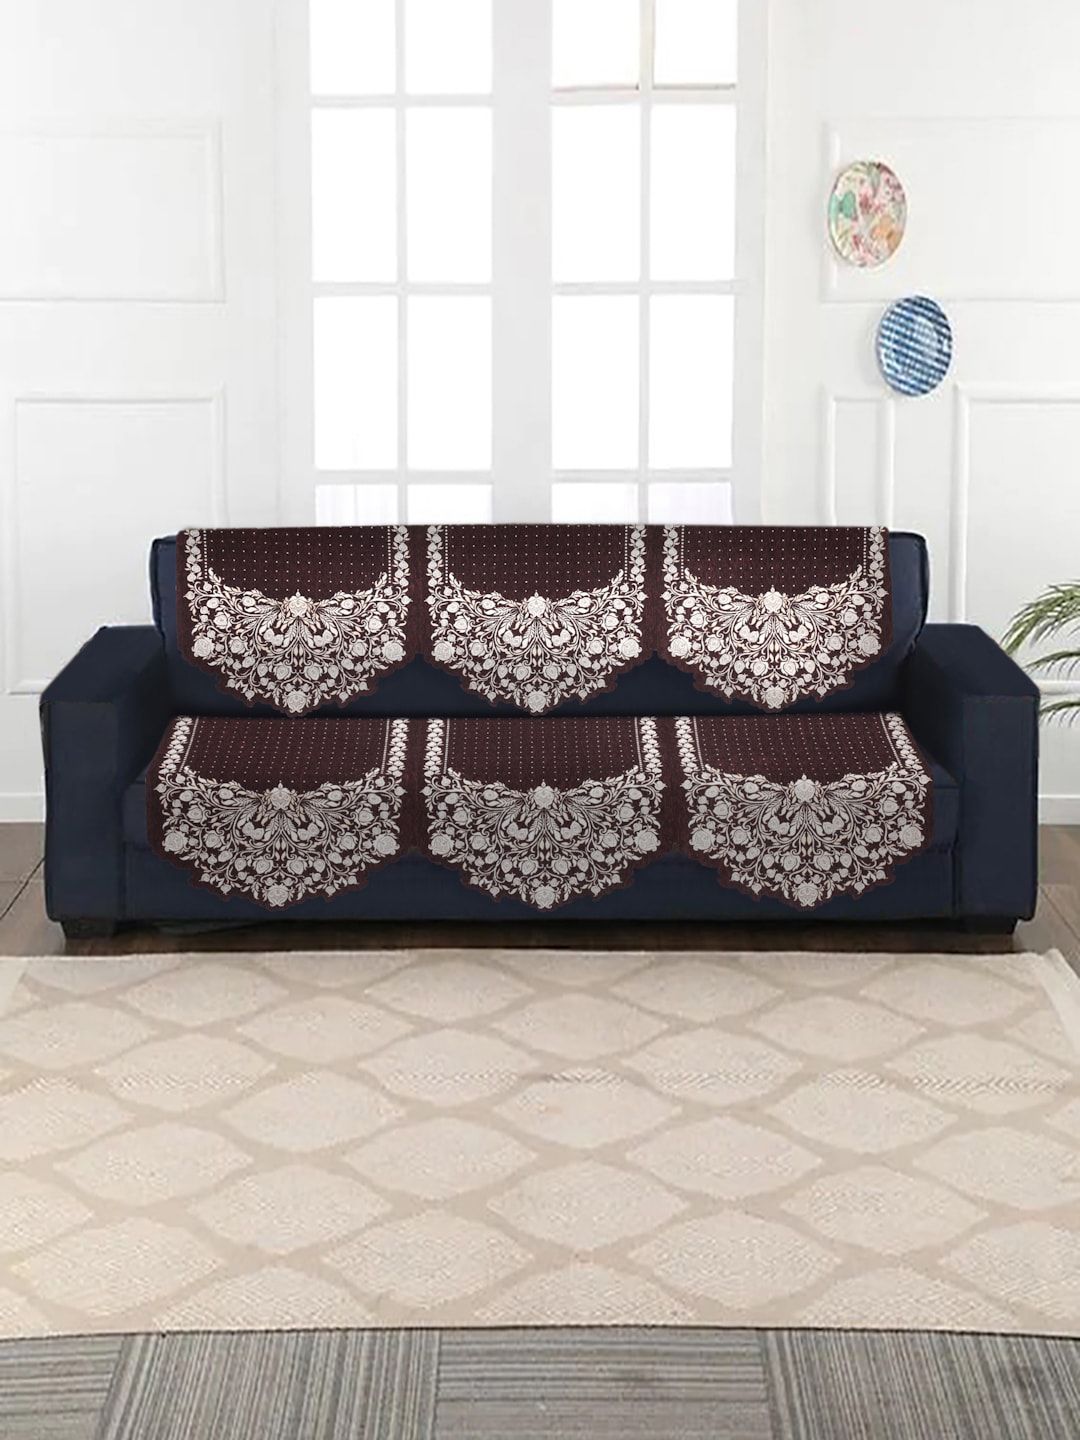 HOSTA HOMES Set of 6 Maroon & White Floral Jacquard 3-Seater Sofa Covers Price in India